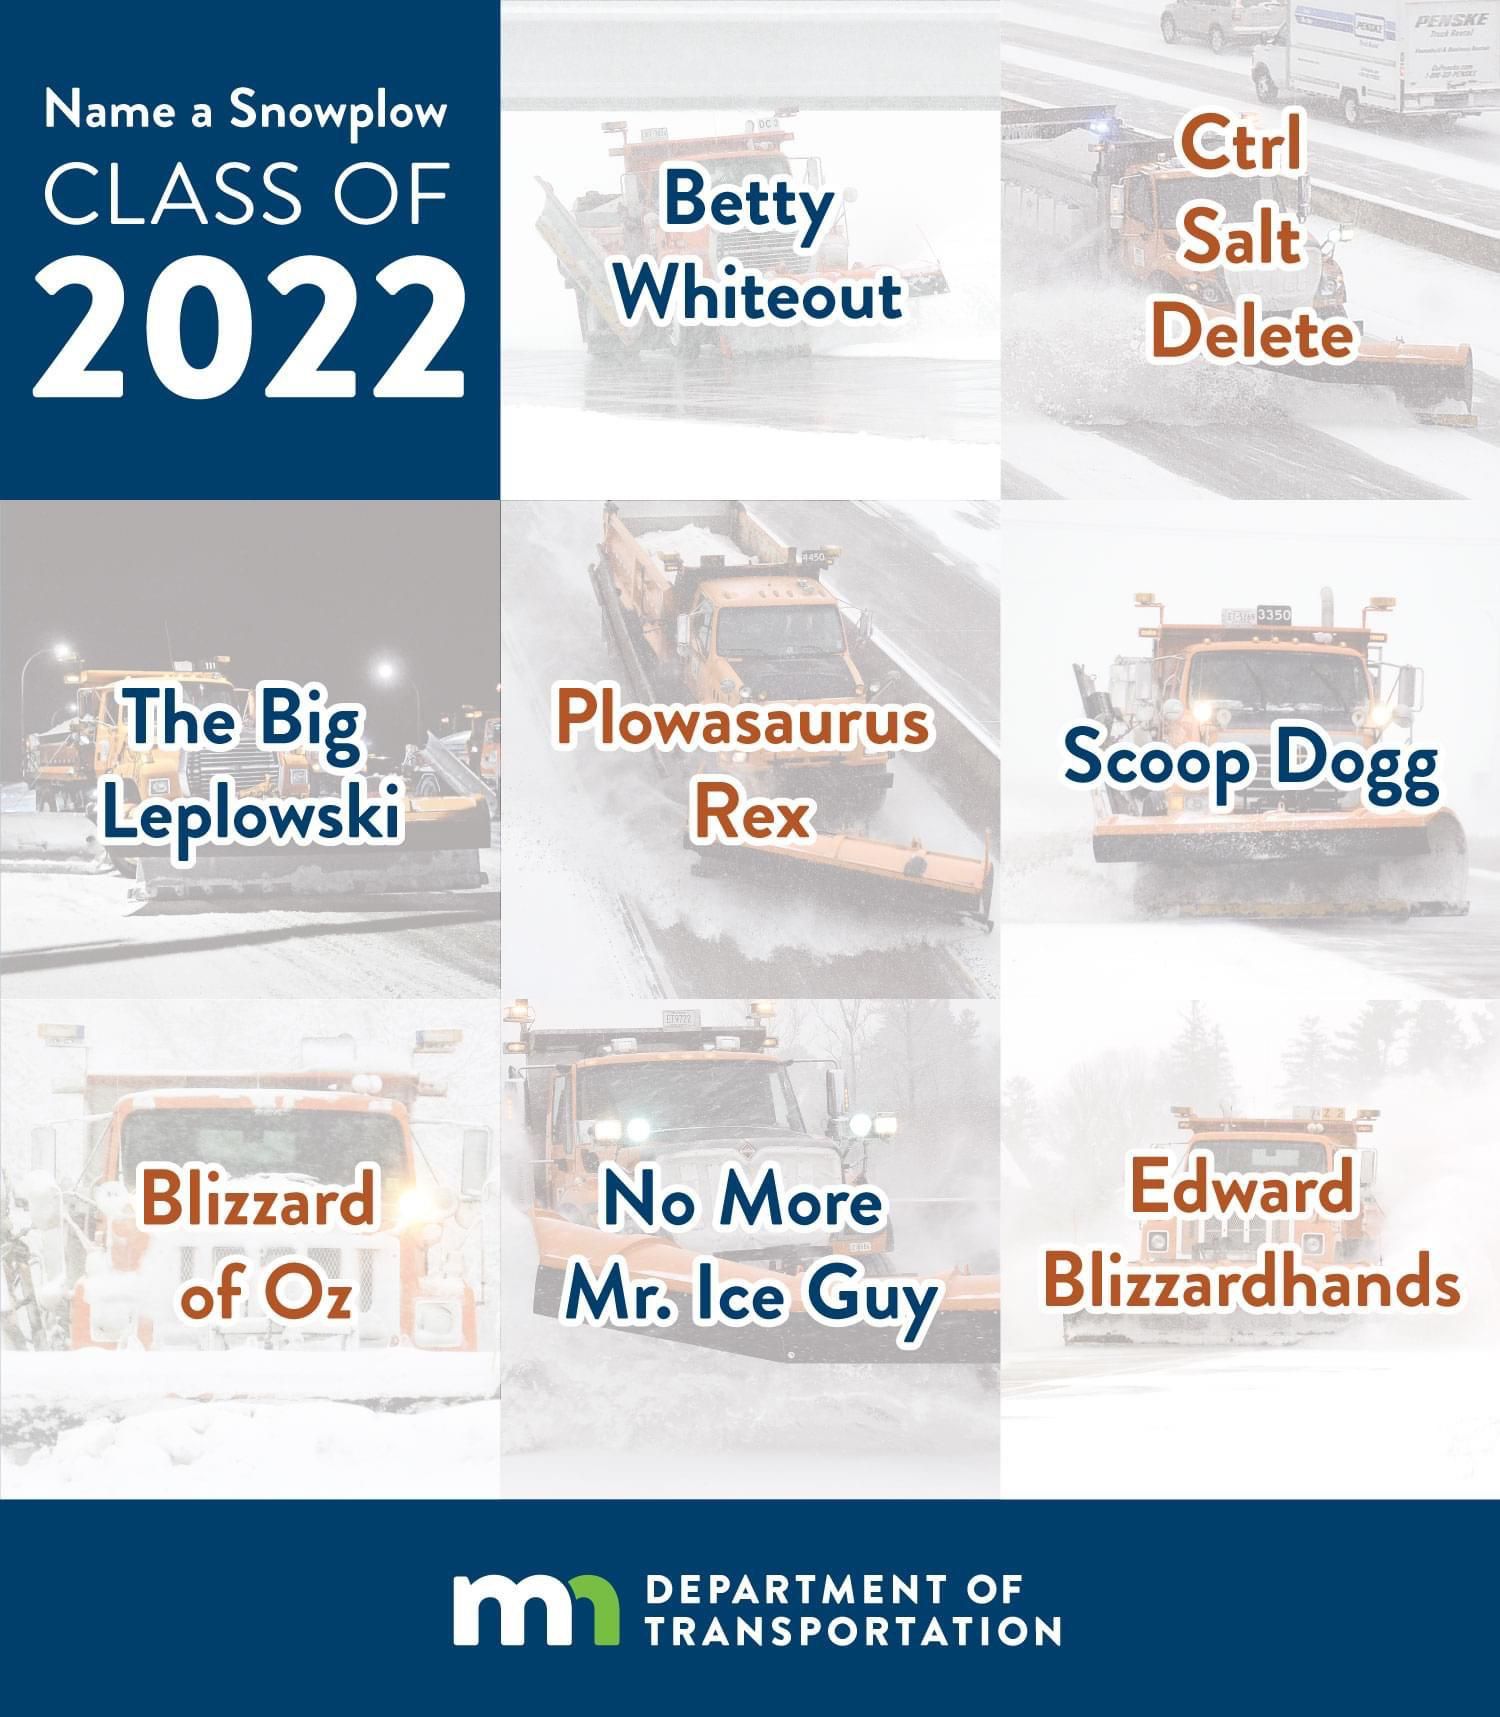 The Minnesota snow plow class of 2022 names did not disappoint.